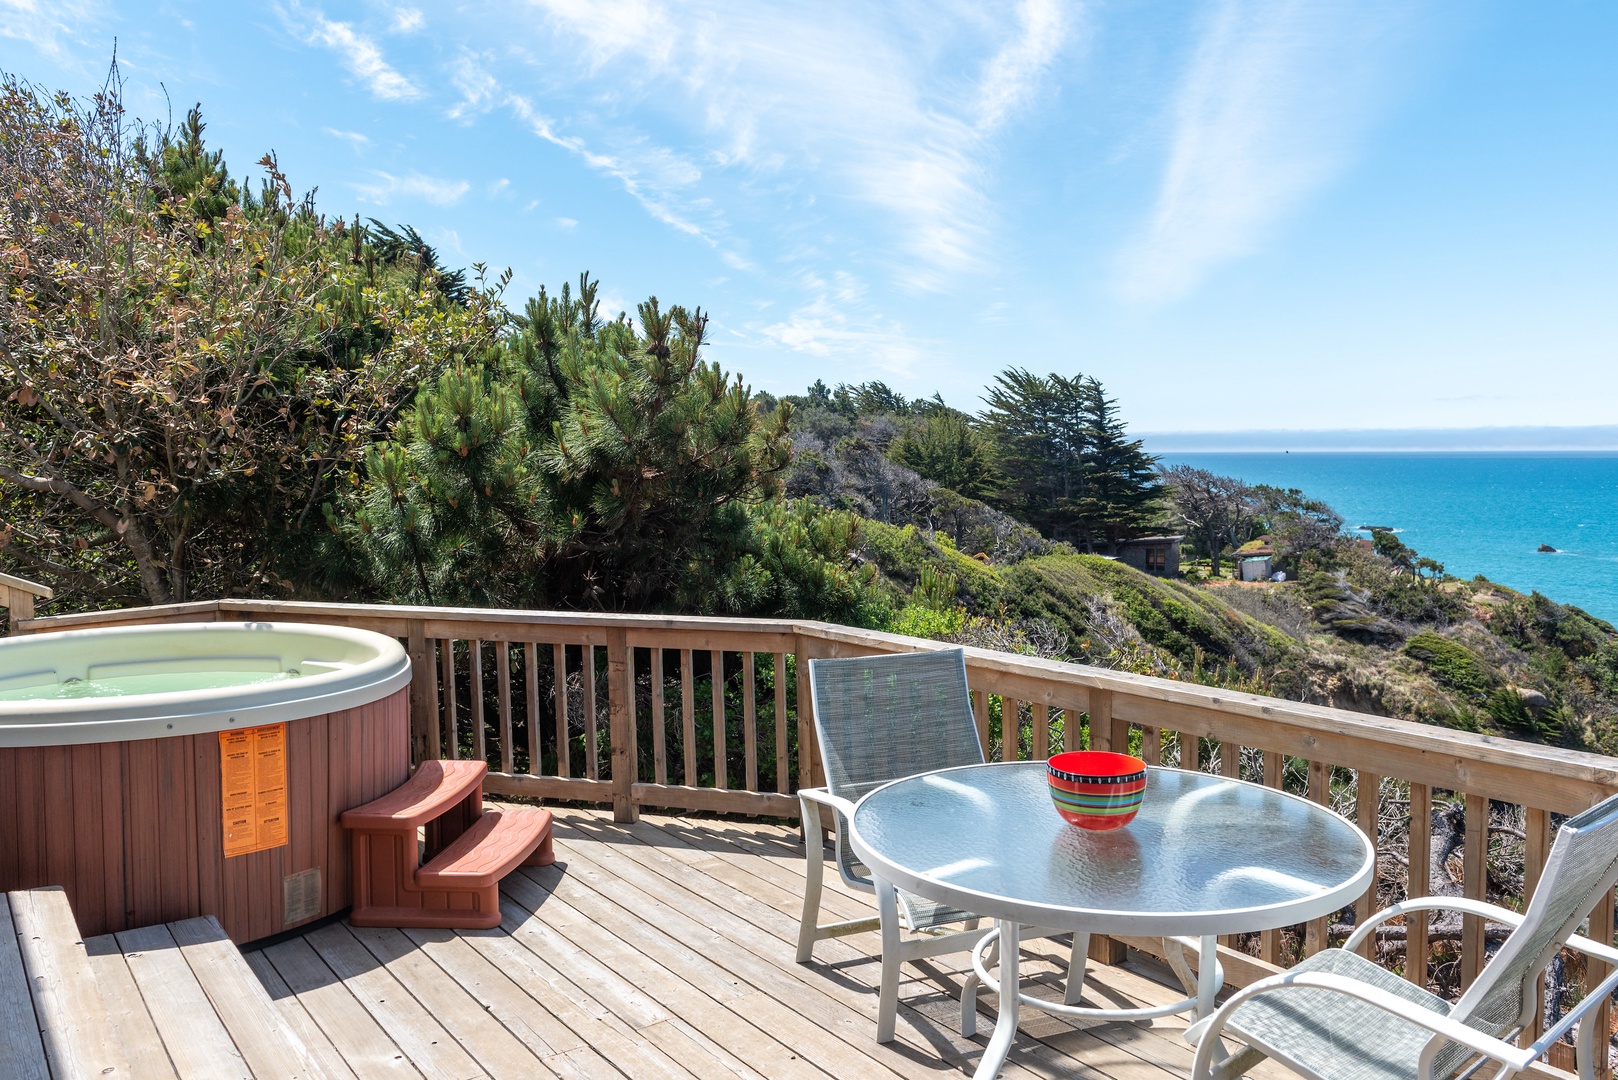 Take a soak in the hot tub overlooking the ocean view